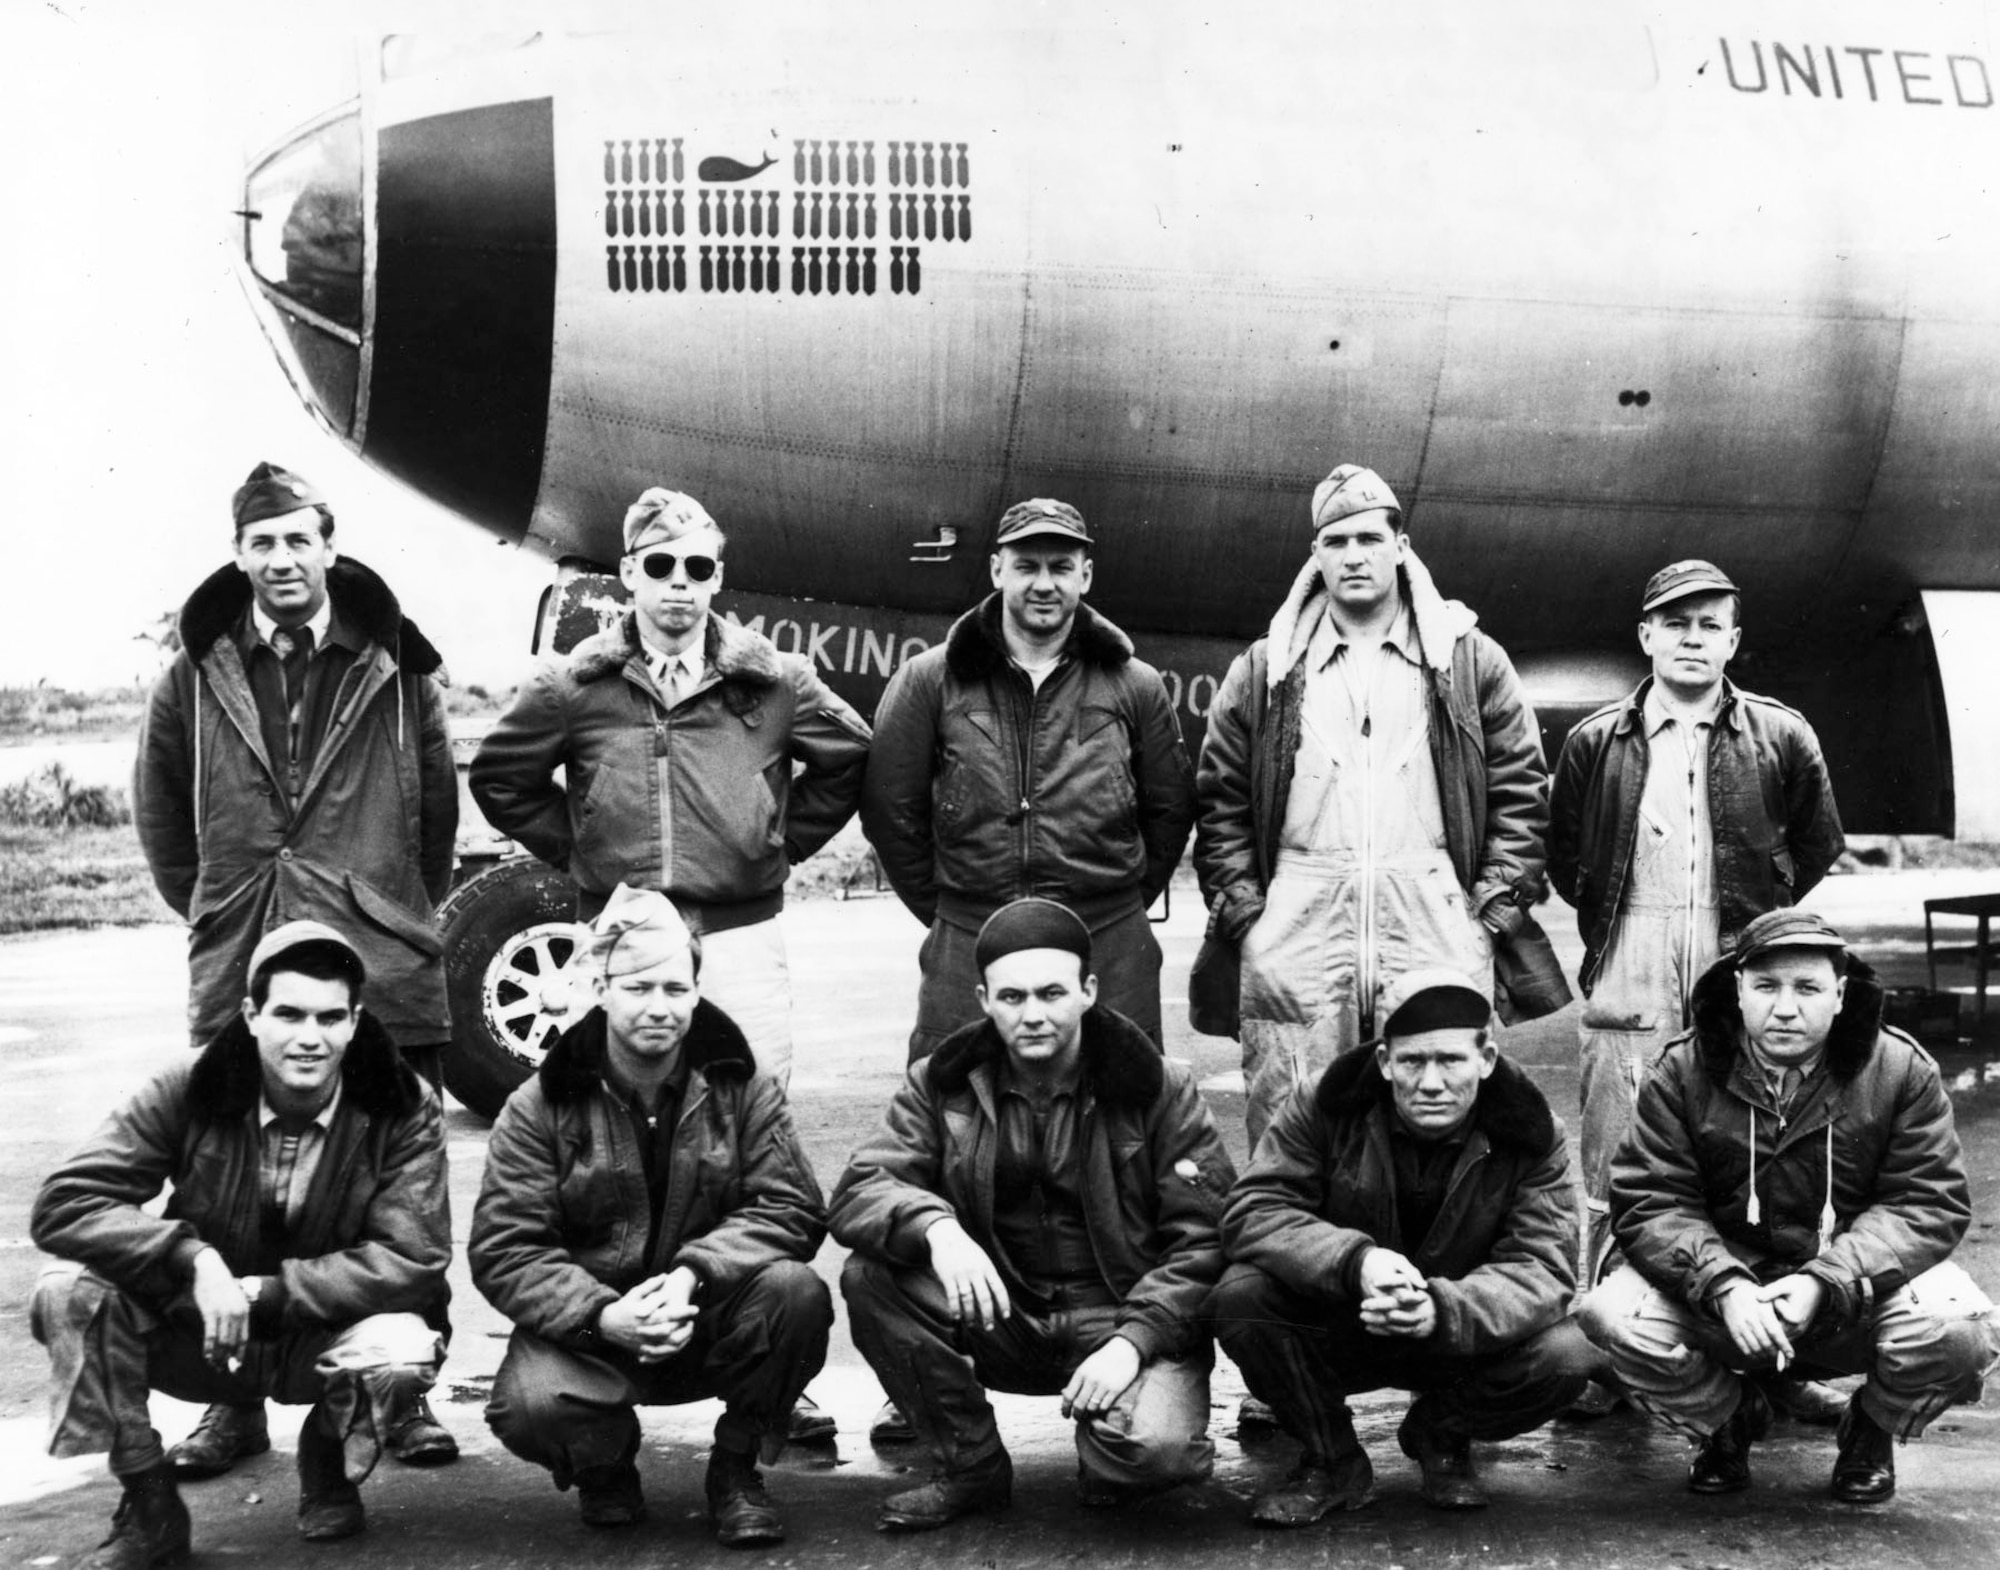 Staff Sgt. James Fleming, a B-29 tail gunner who flew 56 missions in Korea (front row, first on right), in 1951 wearing the same B-11 flight jacket and unofficial flight cap now on display at the National Museum of the U.S. Air Force. (U.S. Air Force photo)